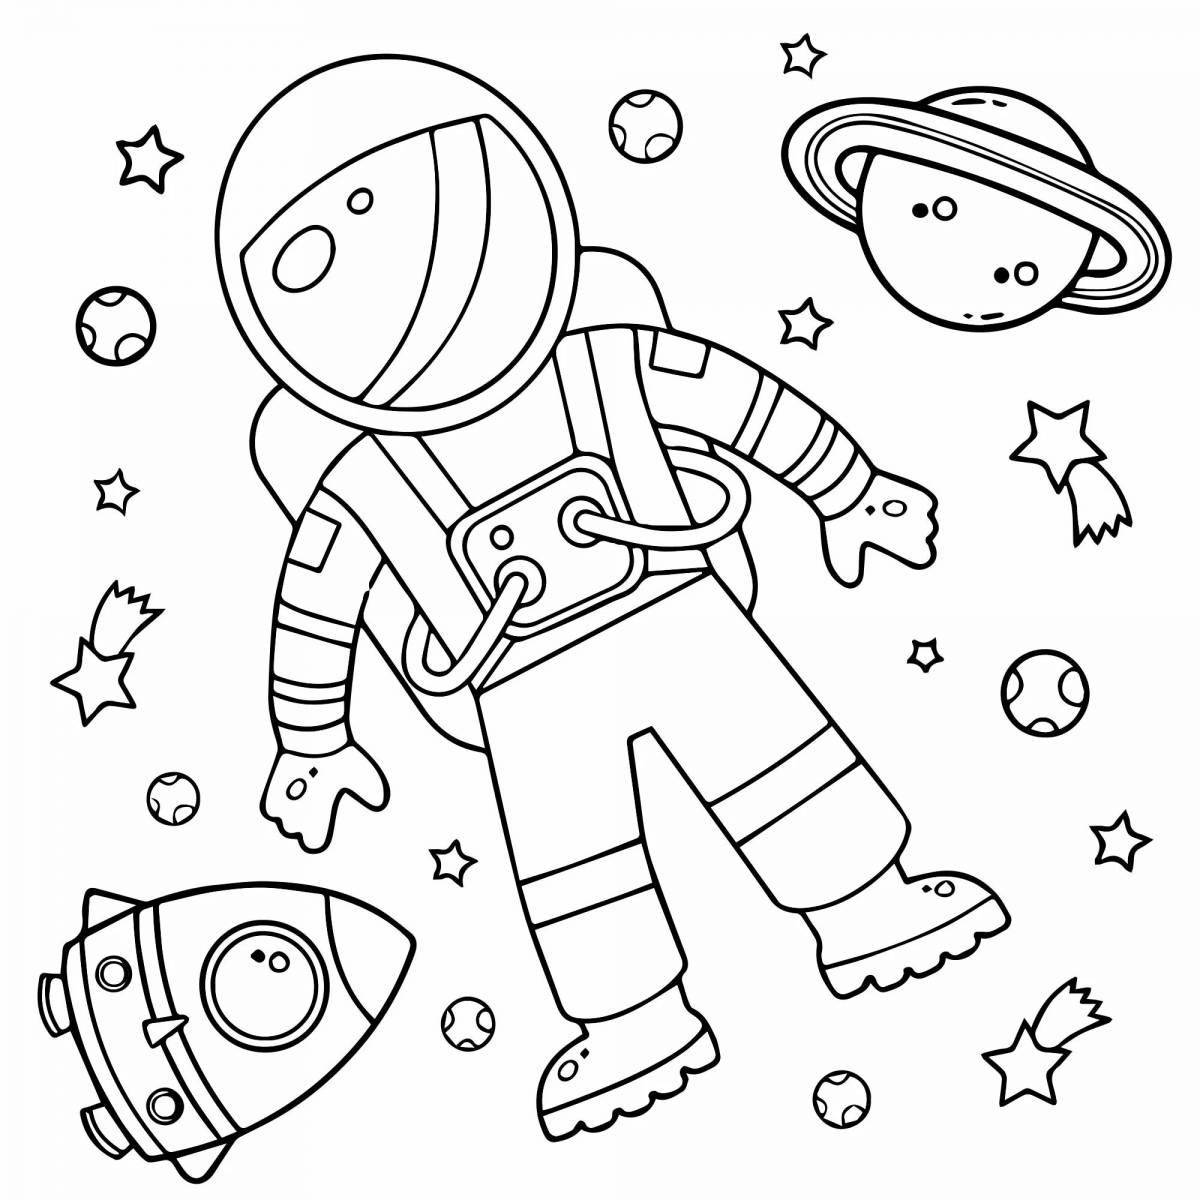 Awesome space coloring book for boys